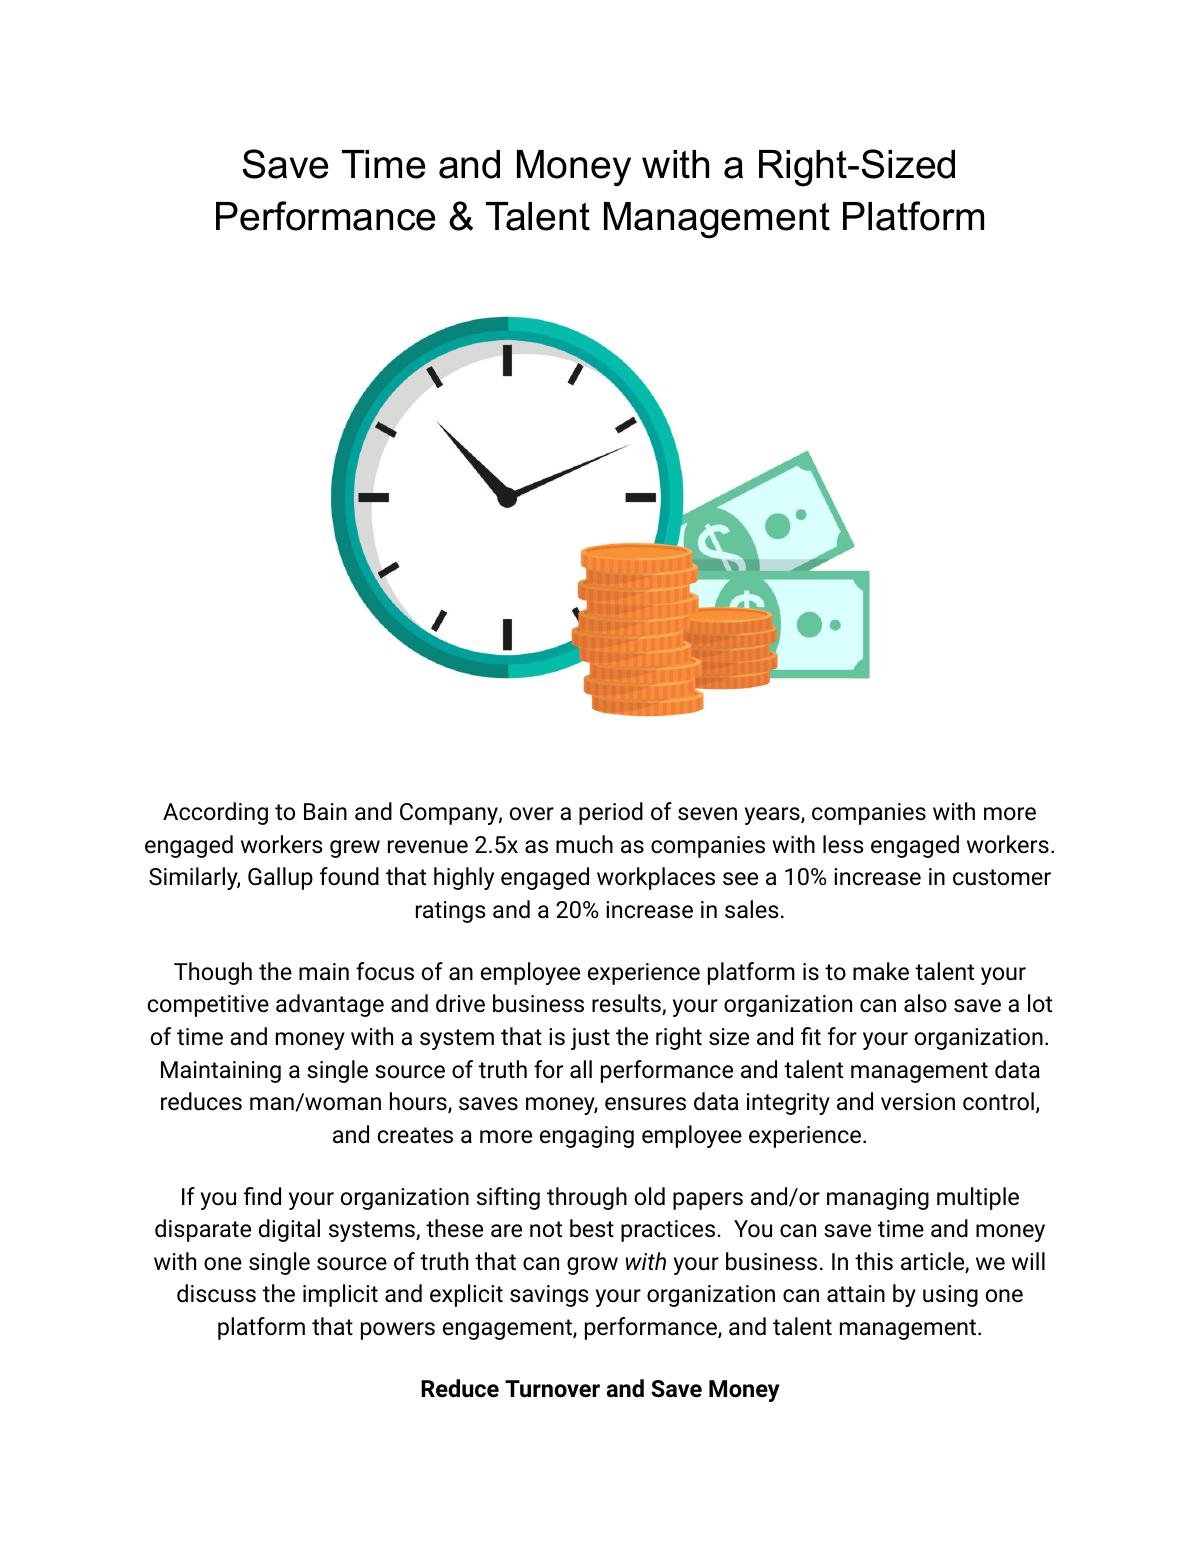 Save Time and Money with a Right-Sized Performance & Talent Management Platform